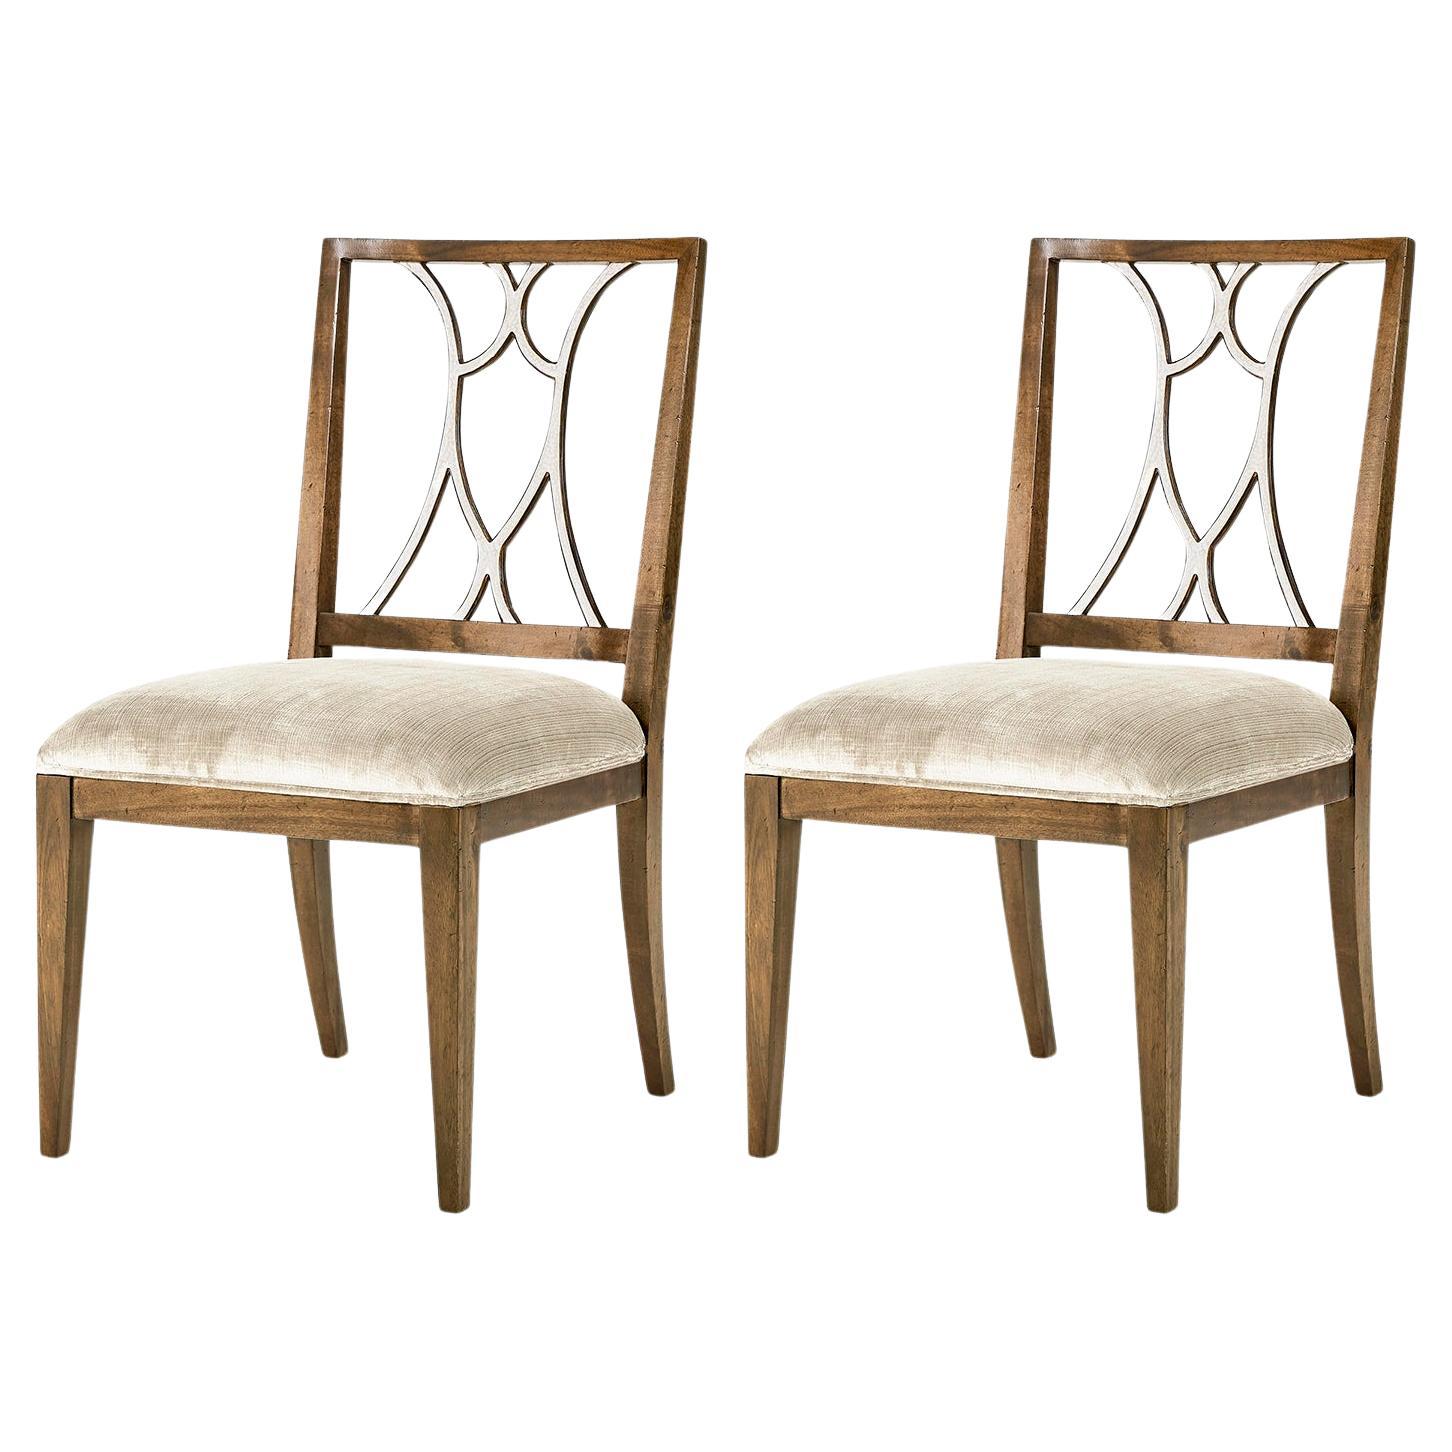 Open Lattice Dining Chairs For Sale